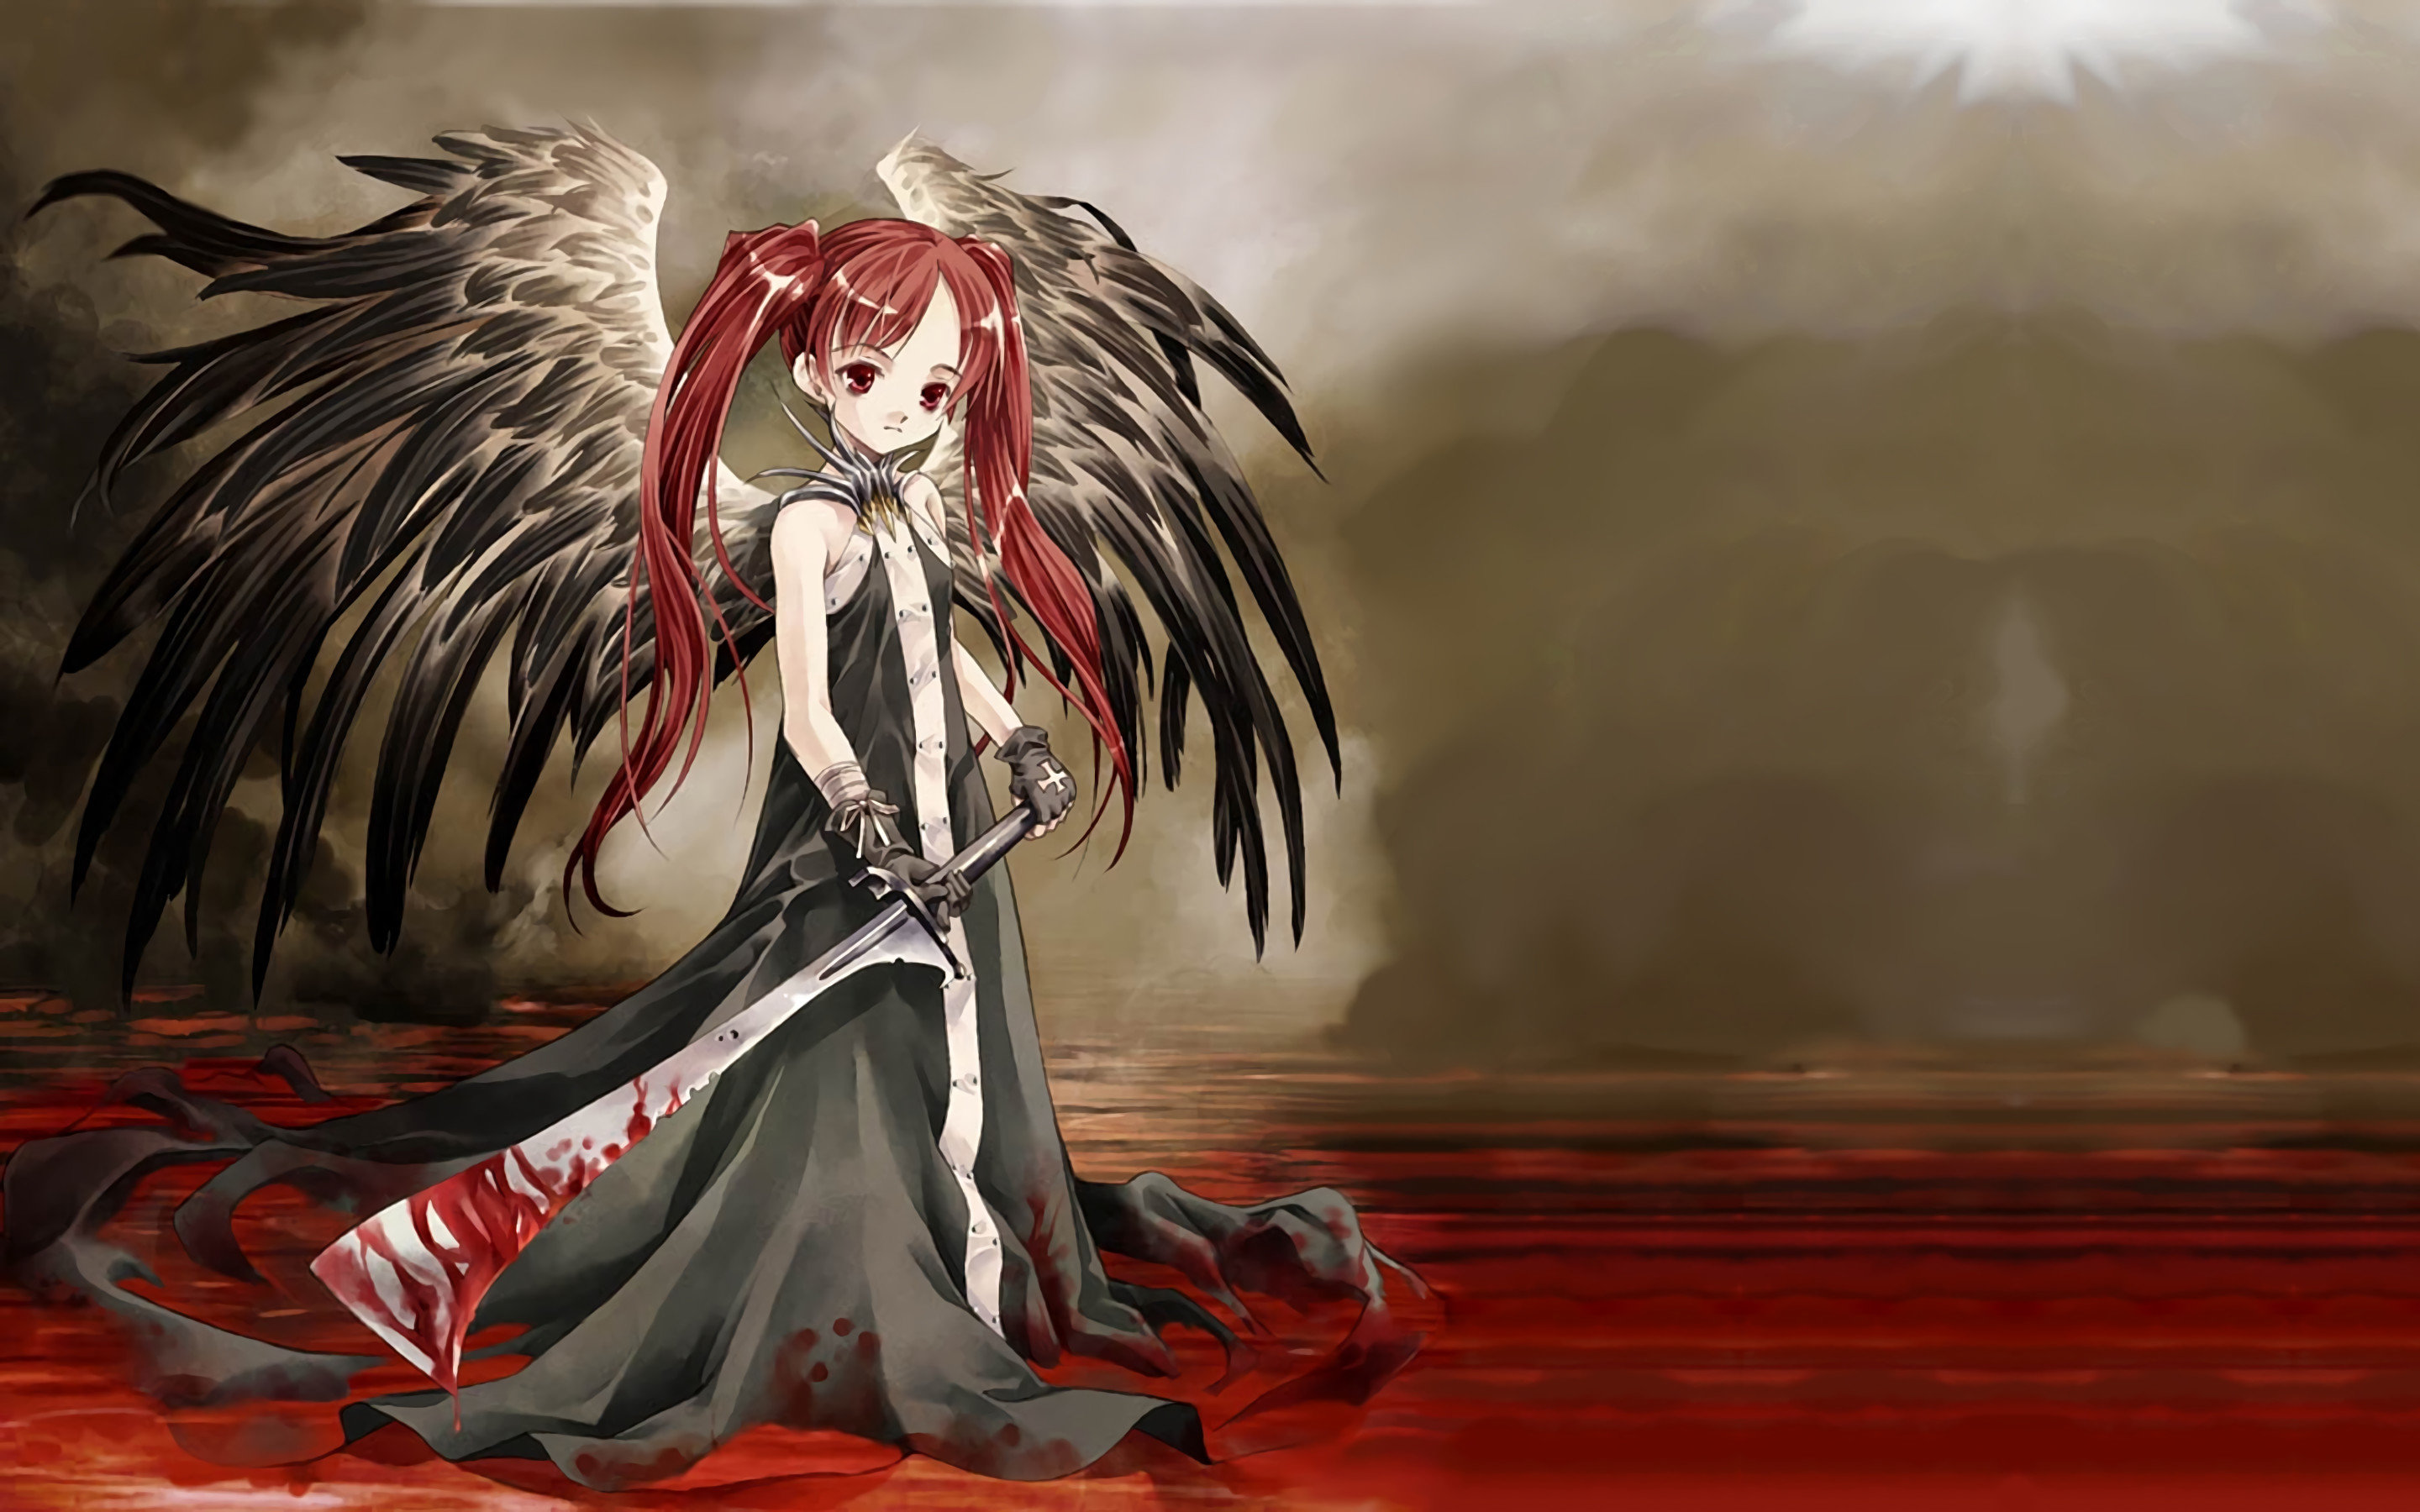 Best Angel Anime wallpaper ID:61885 for High Resolution hd 2880x1800 PC